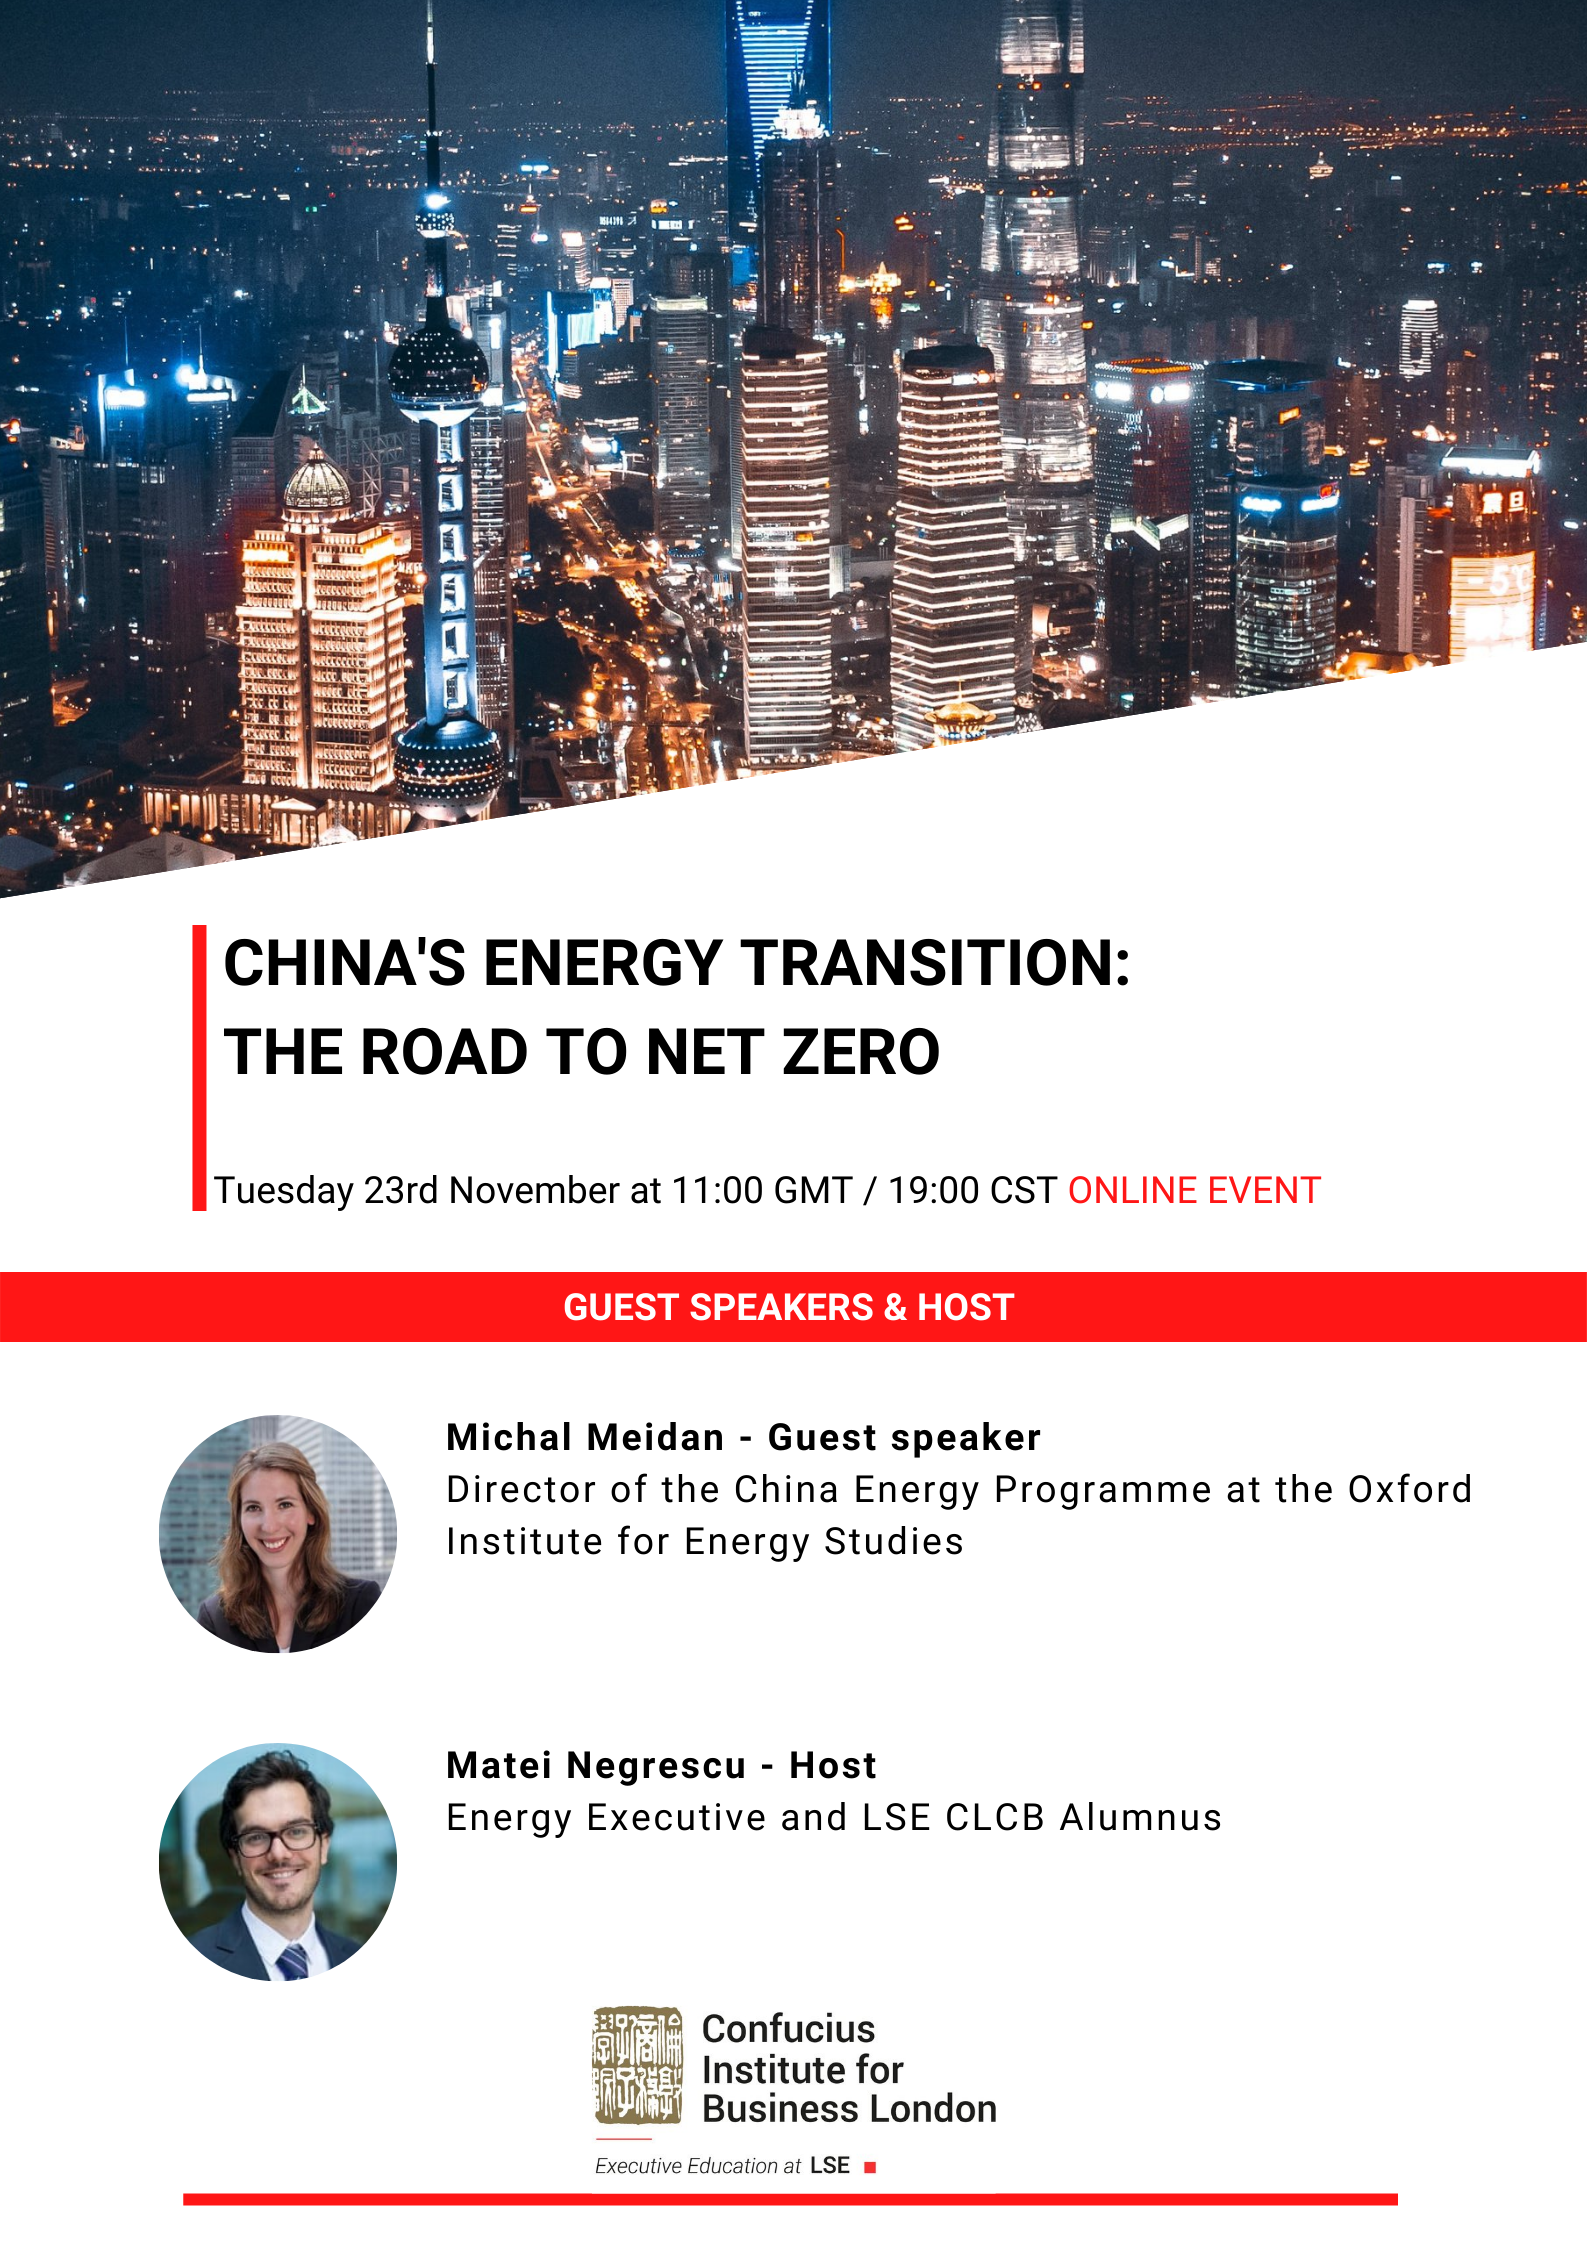 CHINA'S ENERGY TRANSITION THE ROAD TO ZERO NET